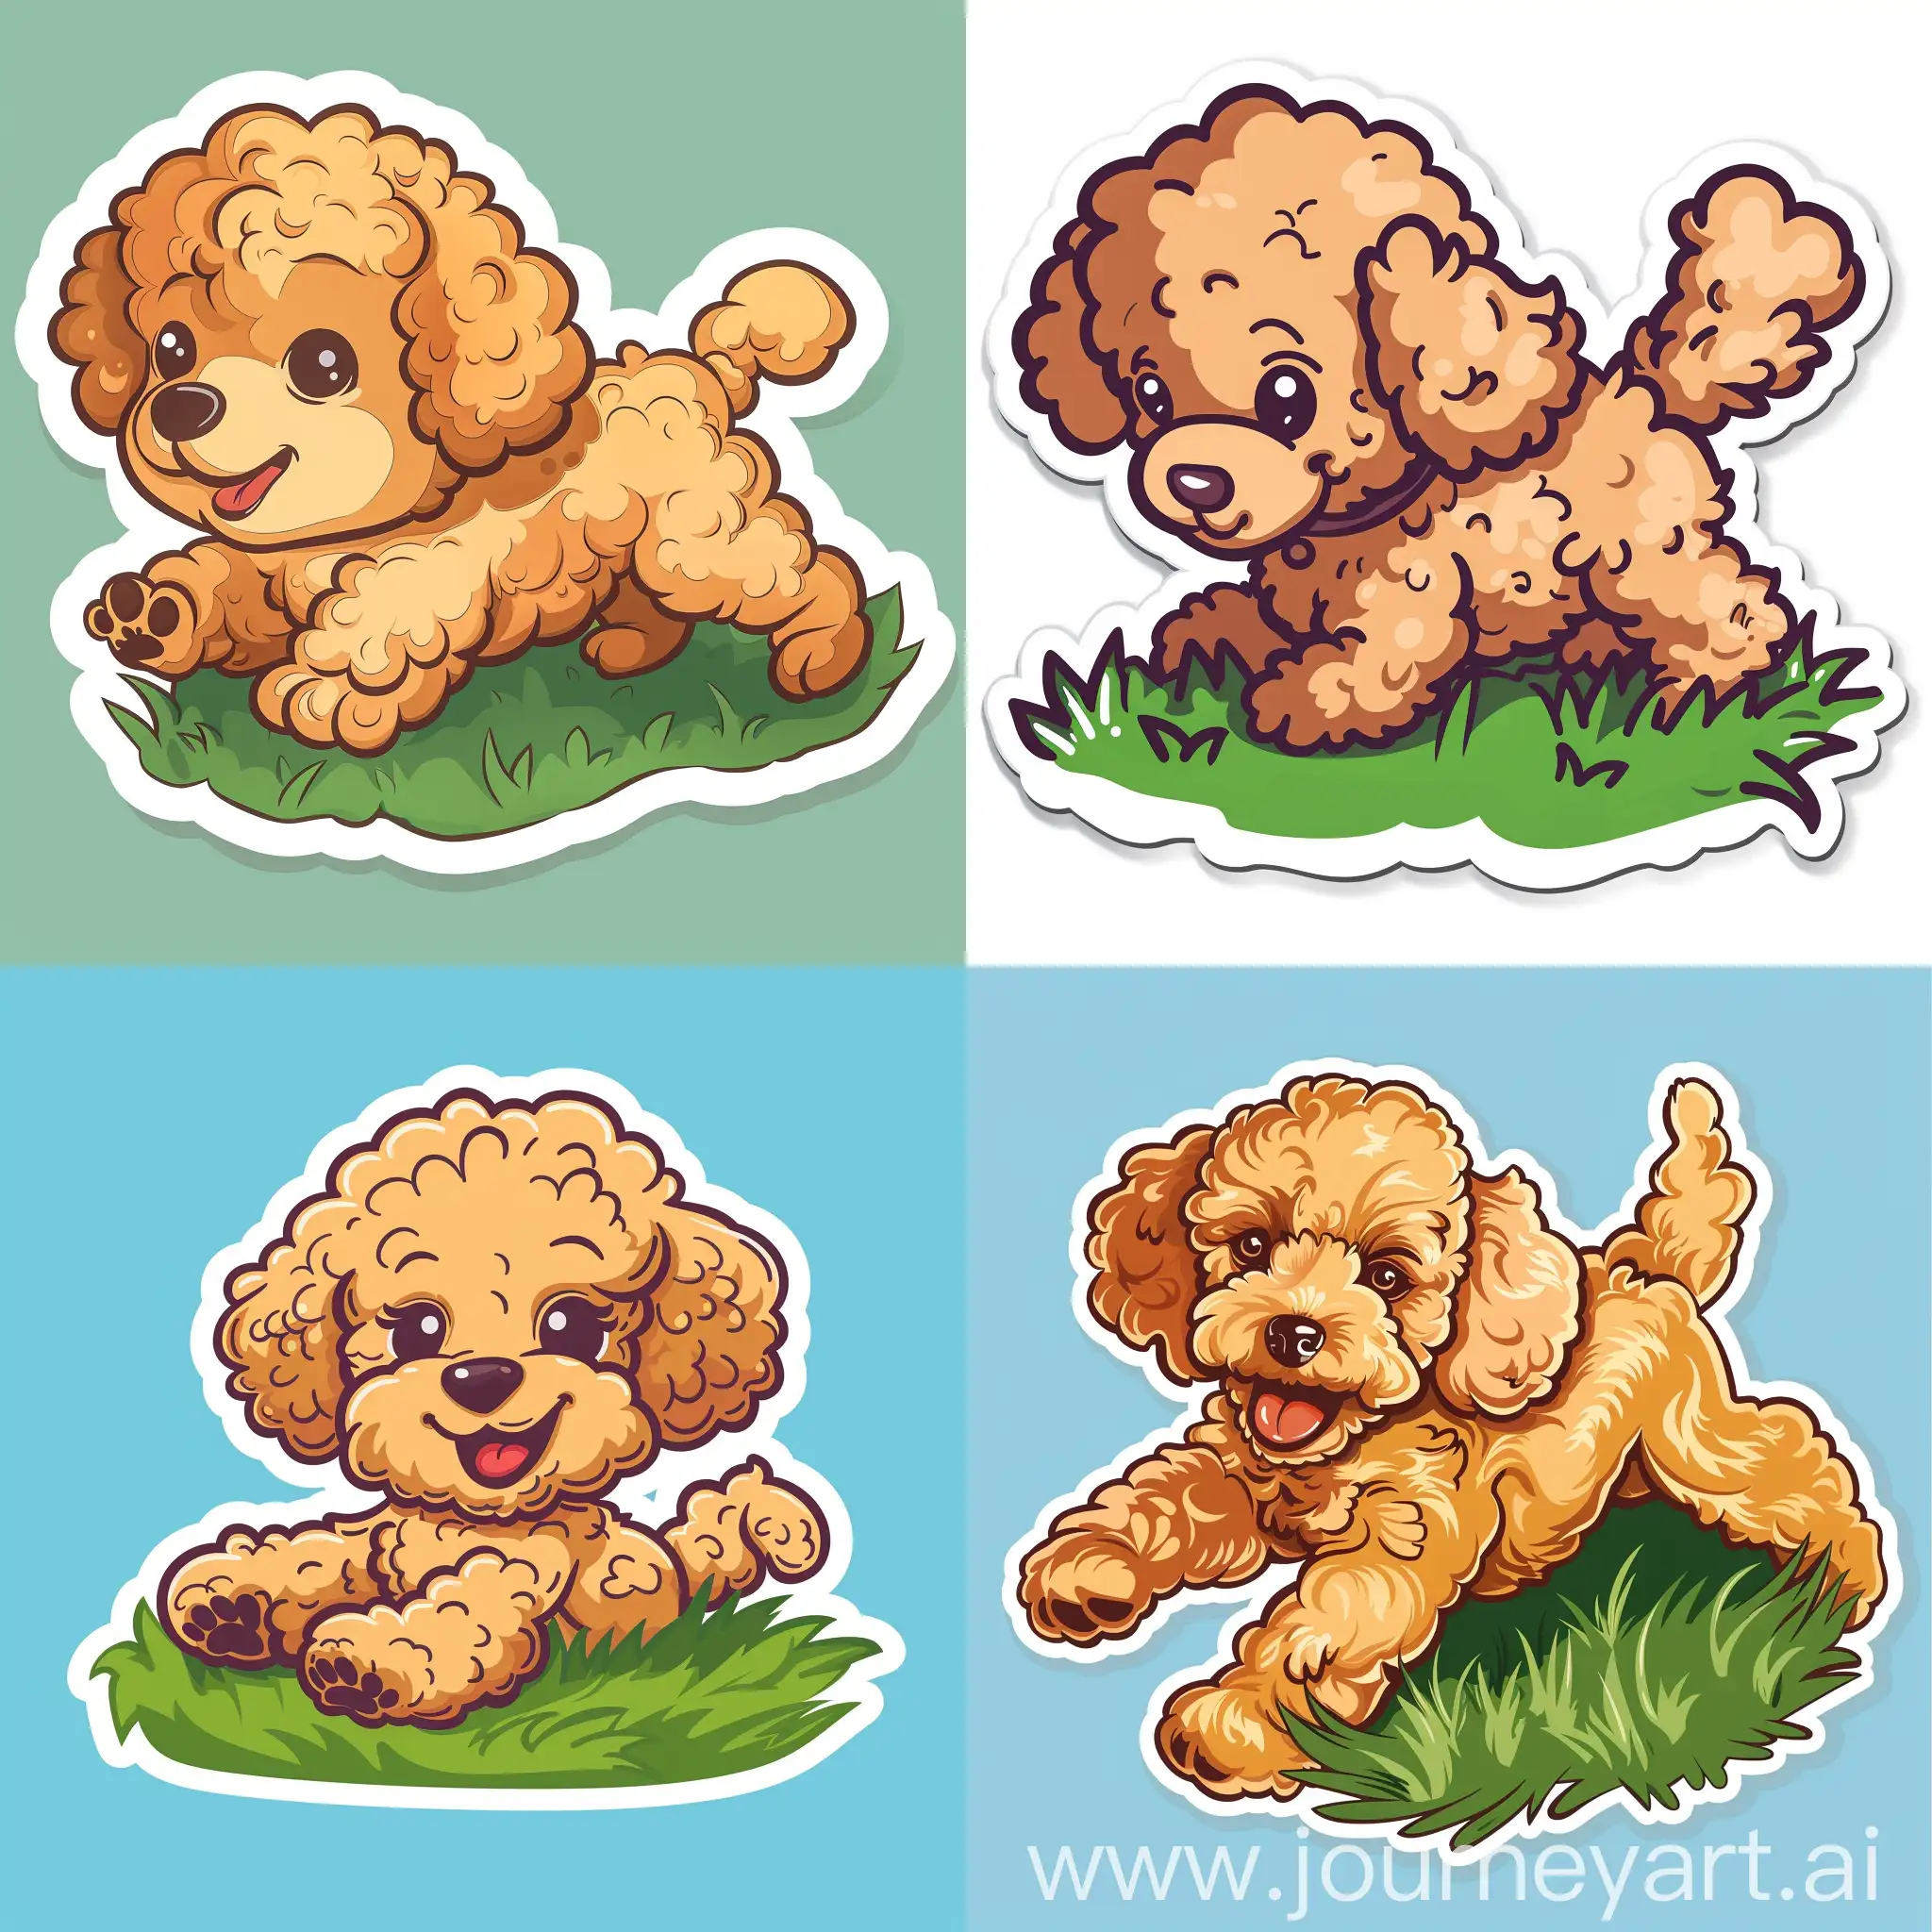 Playful-Young-Poodle-Enjoying-Outdoor-Fun-on-the-Grass